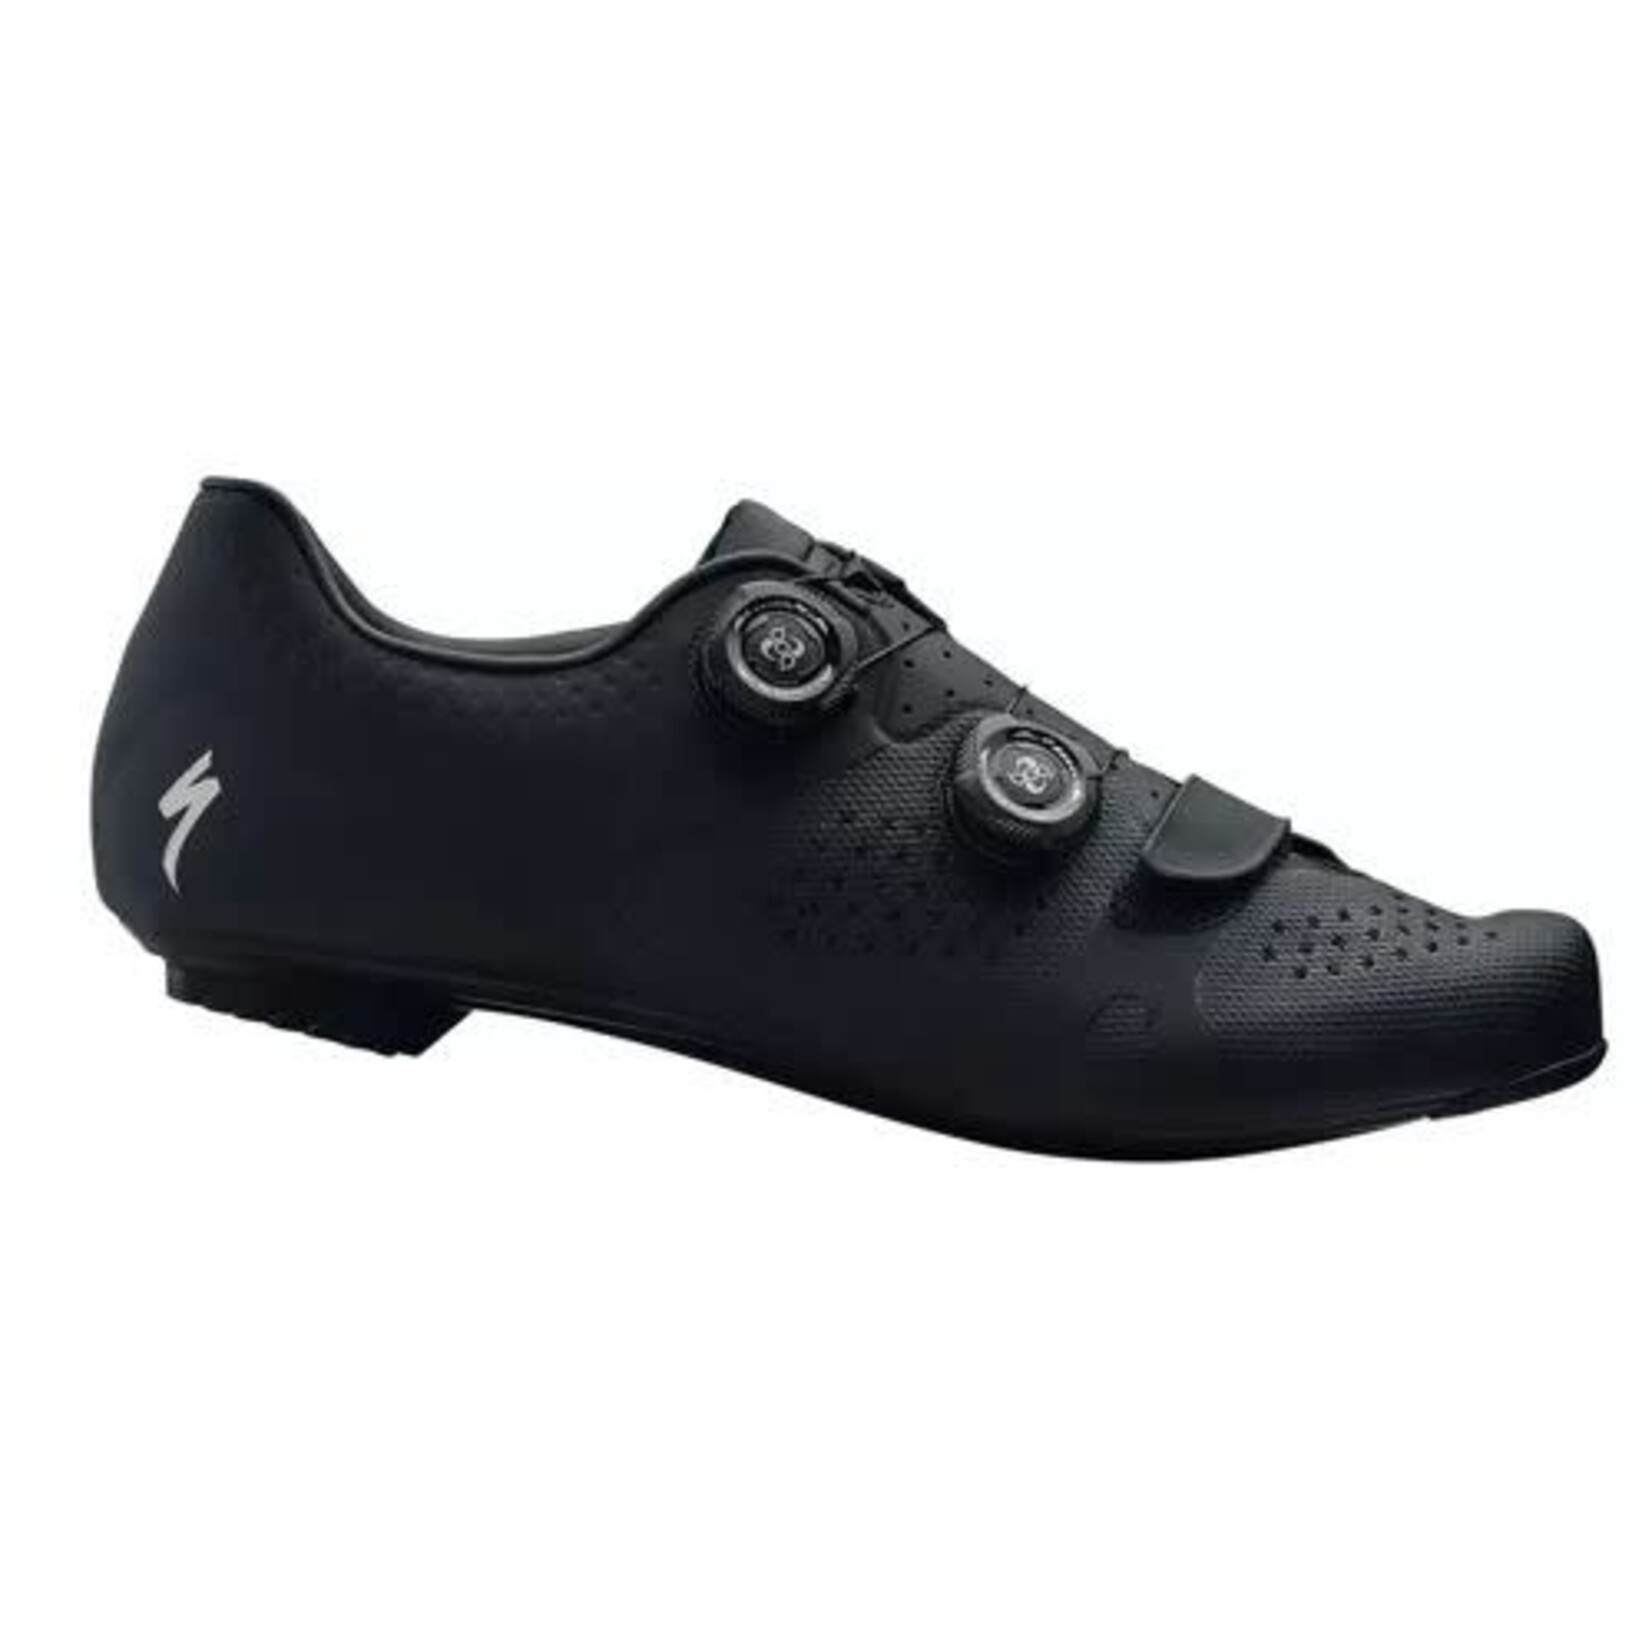 Specialized TORCH 3.0 RD SHOE BLK 38